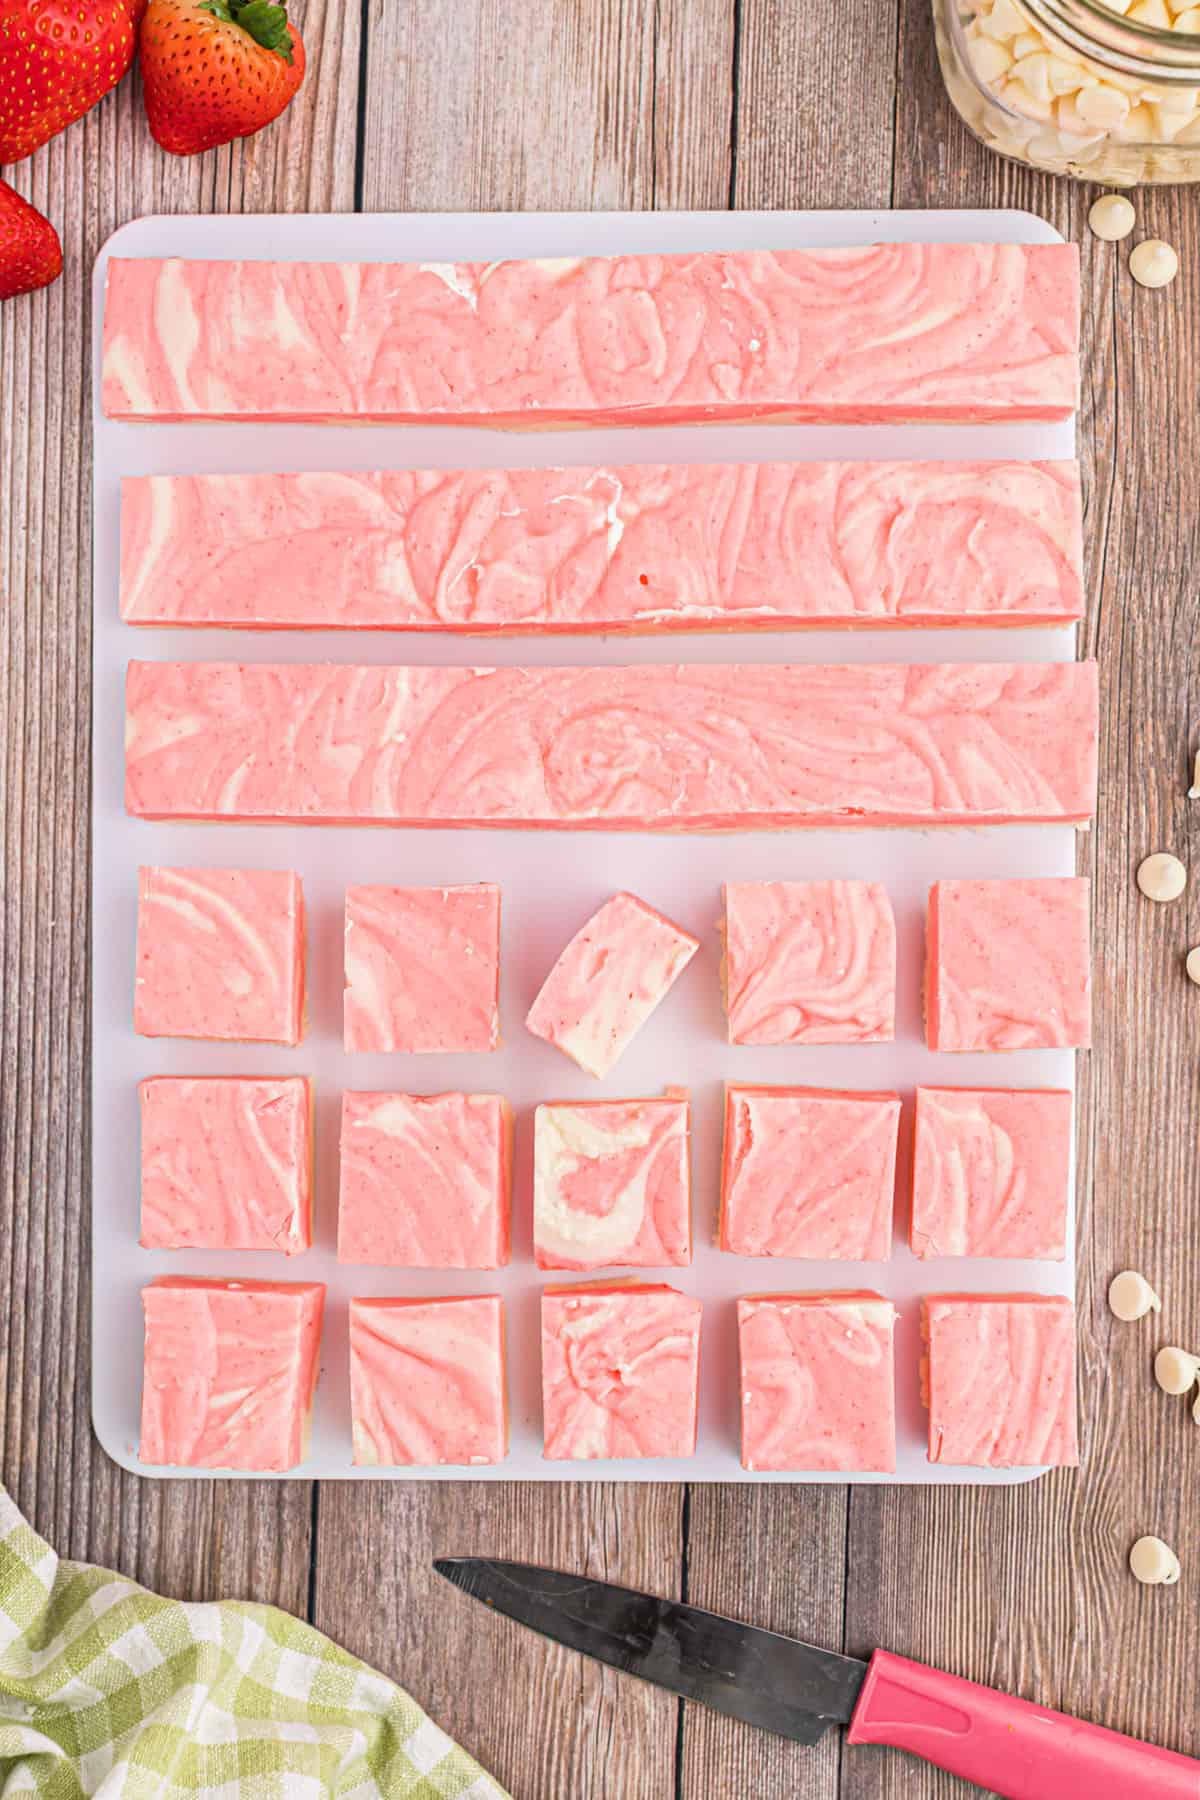 Pieces of strawberry swirl fudge on parchment paper.